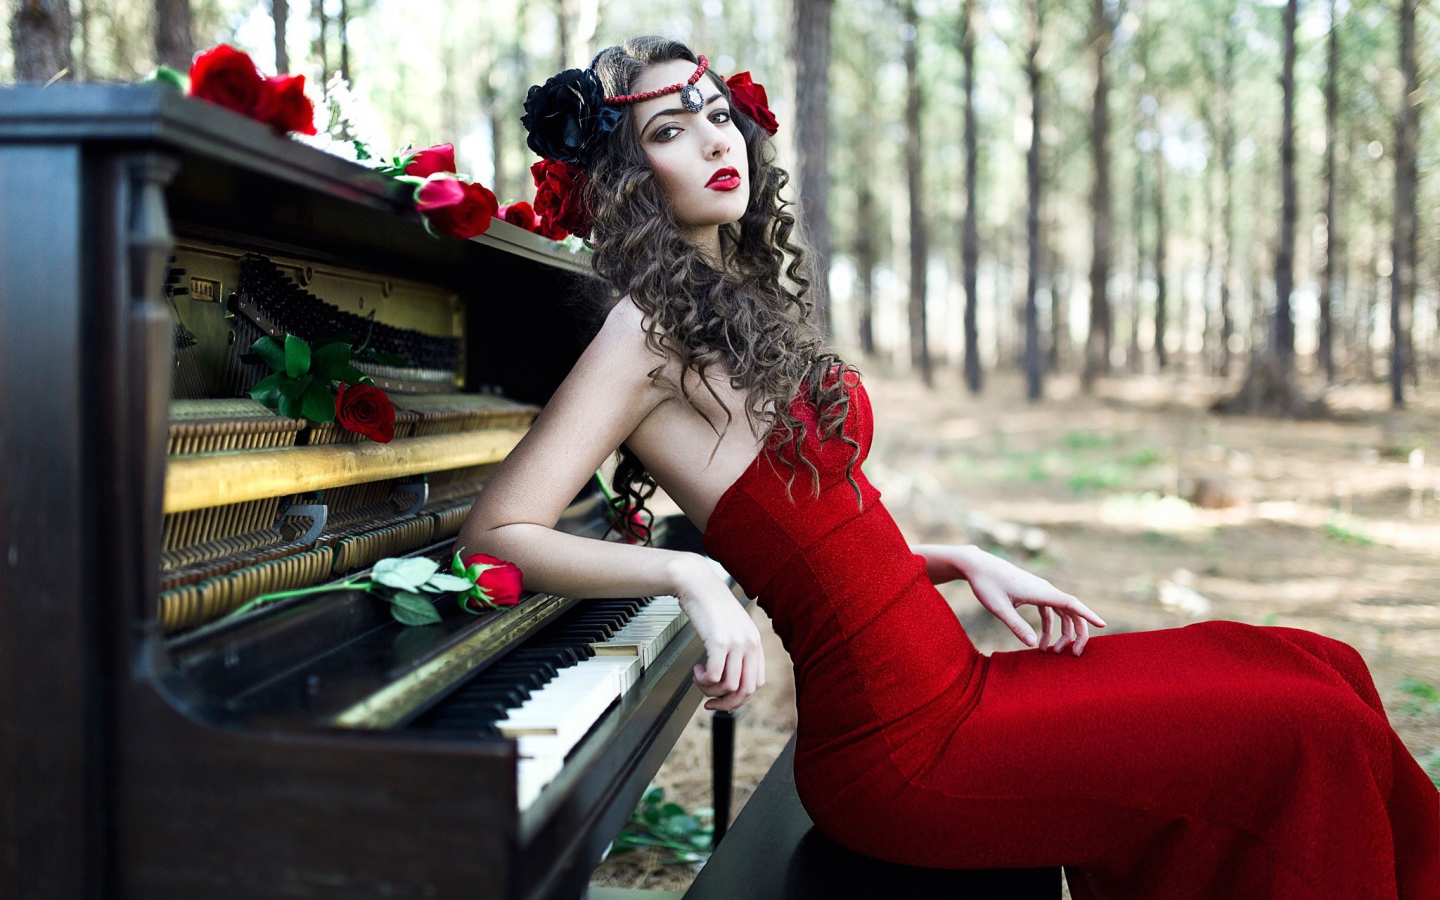 Girl in a red dress sitting at the piano